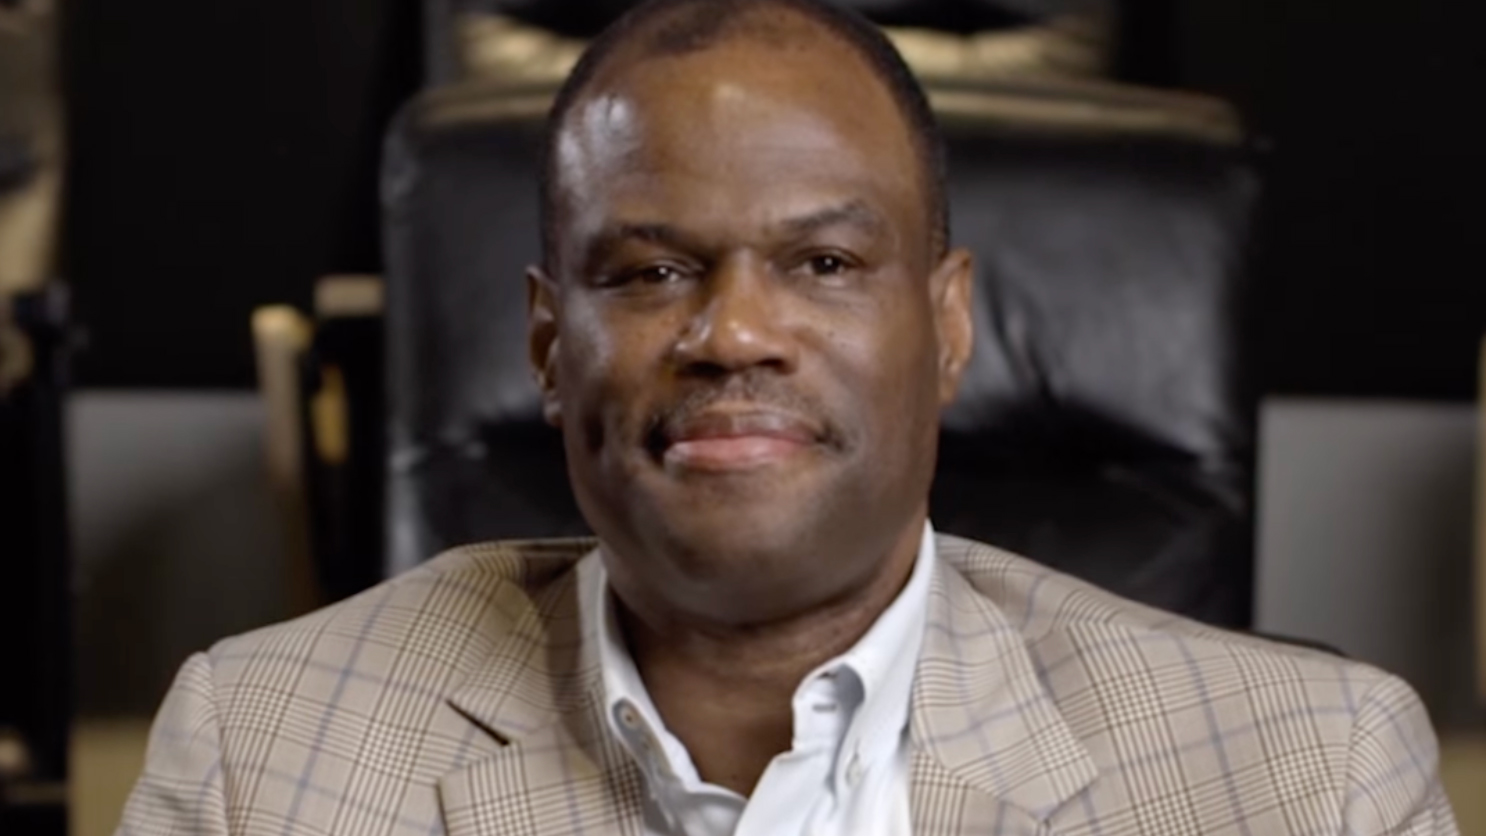 Gold: David Robinson Shows Us Why Basketball Will Always